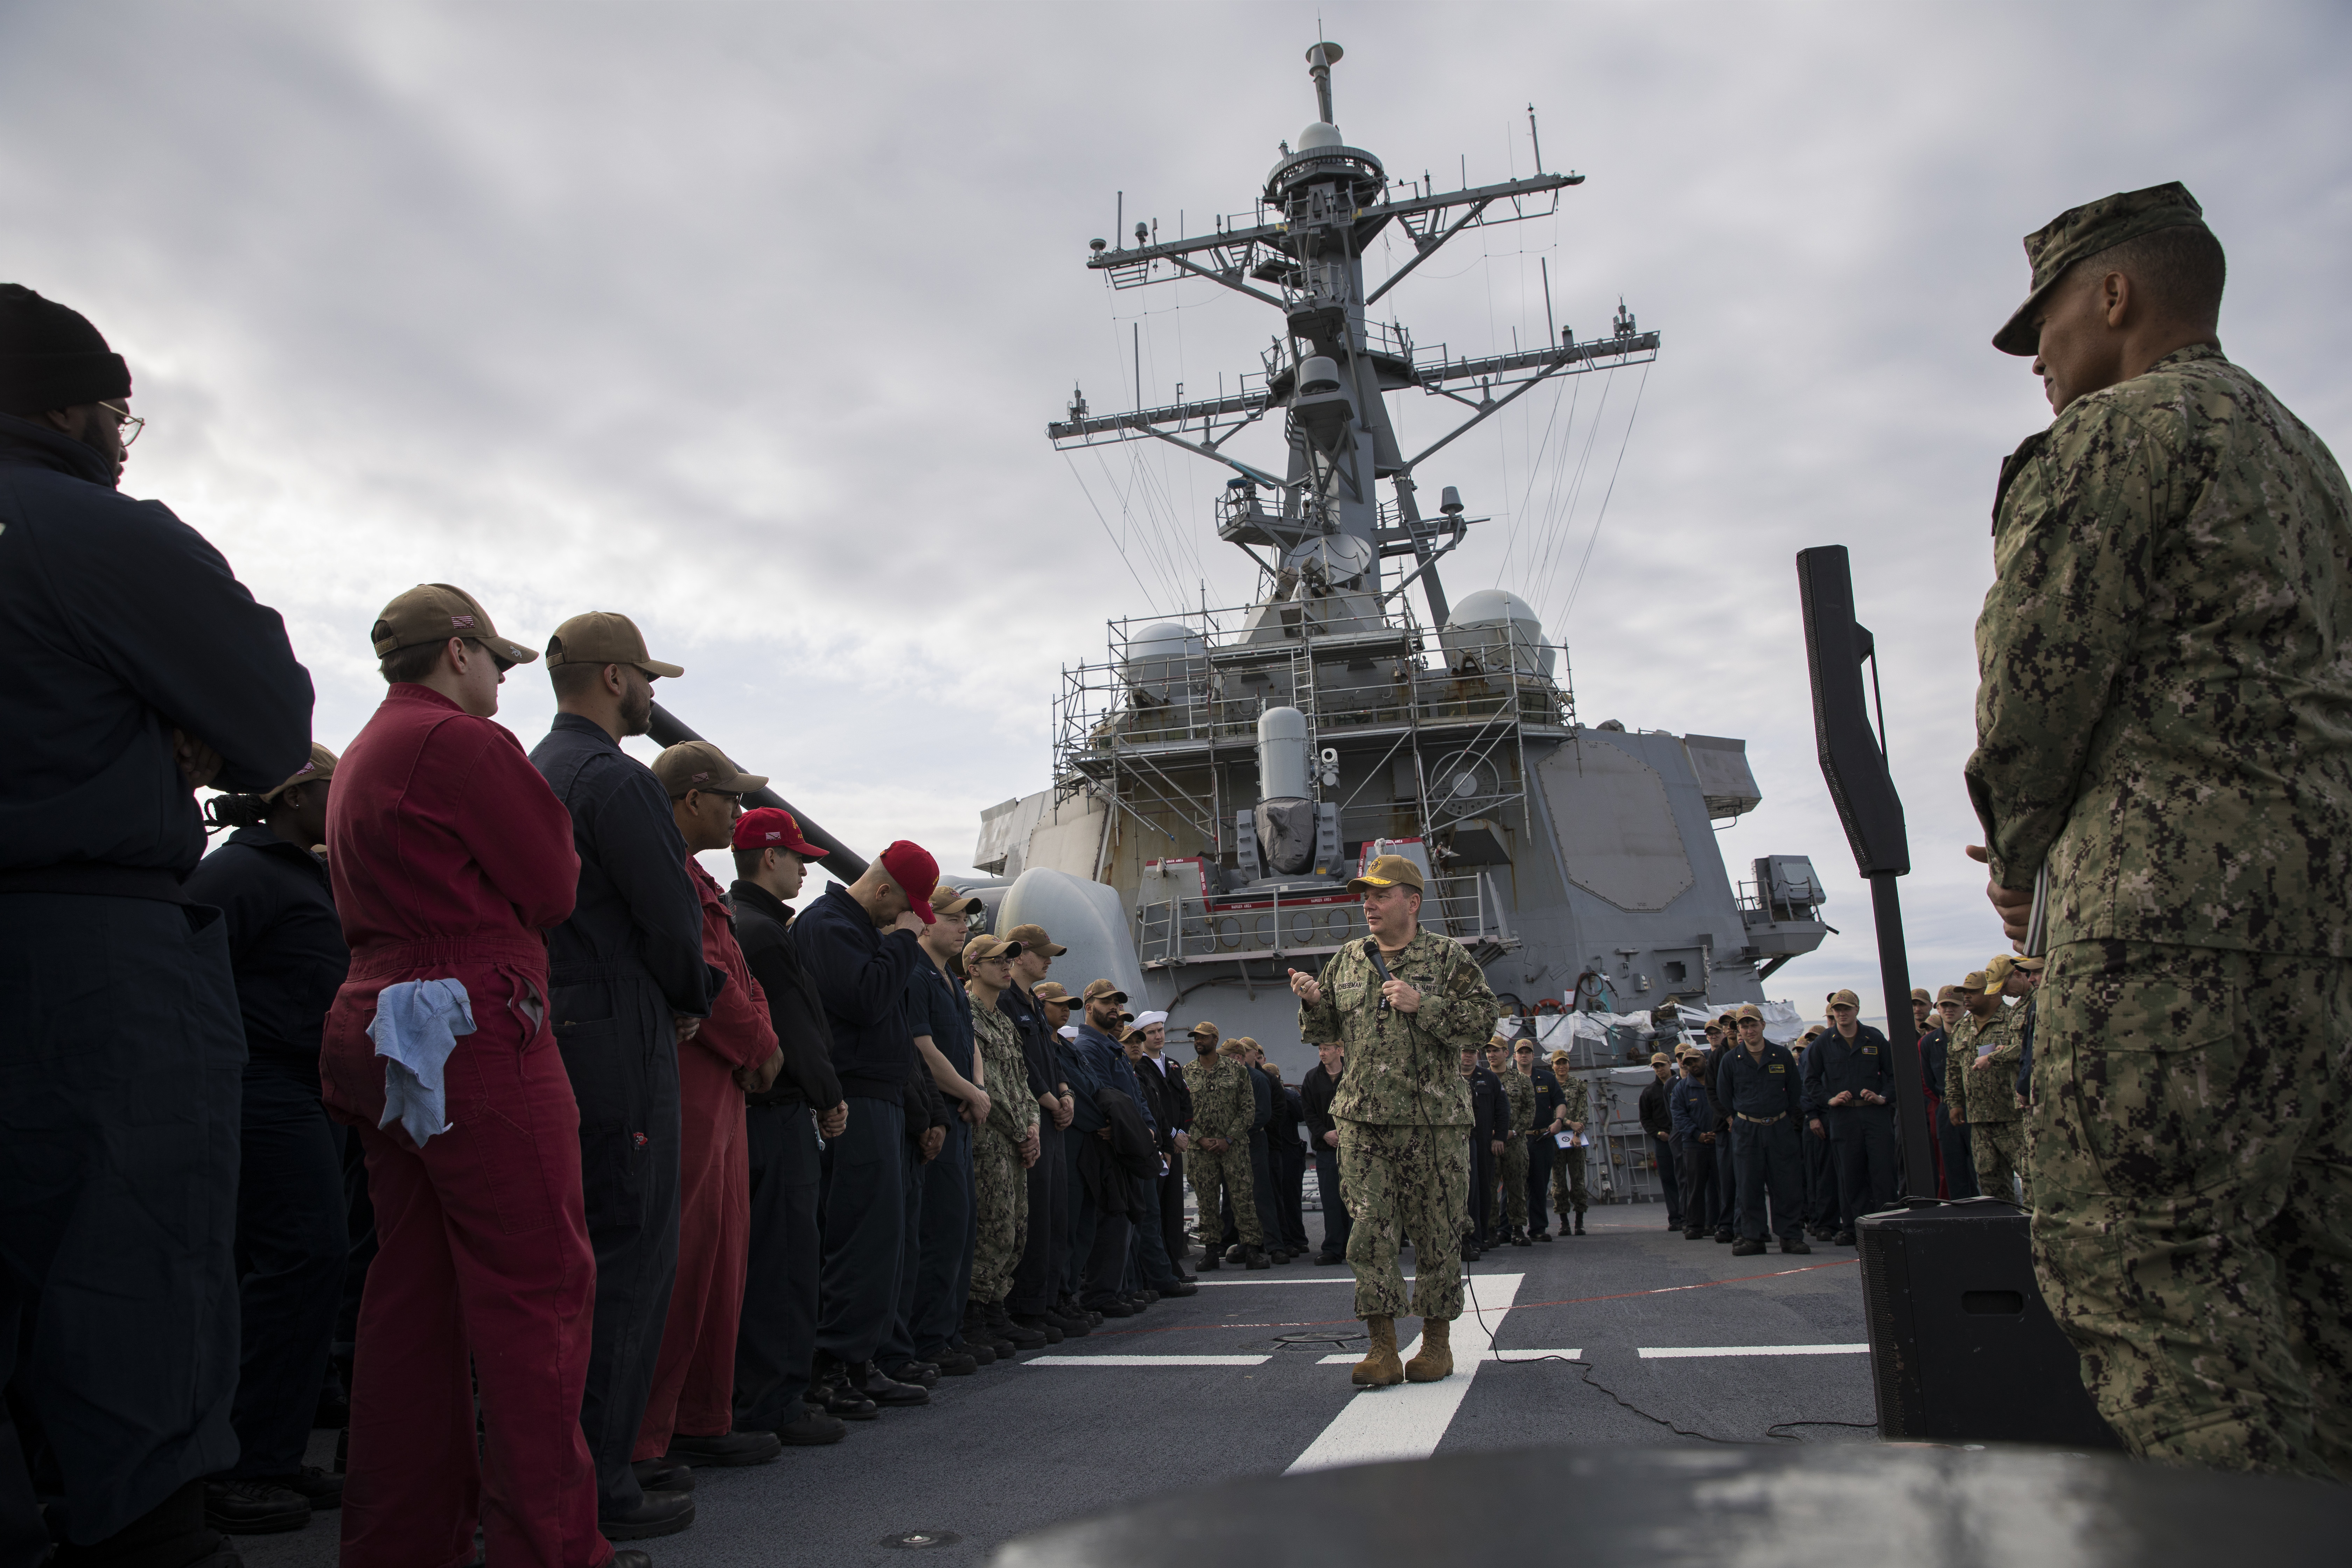 CNP talks to Sailors during an all-hands call on ship